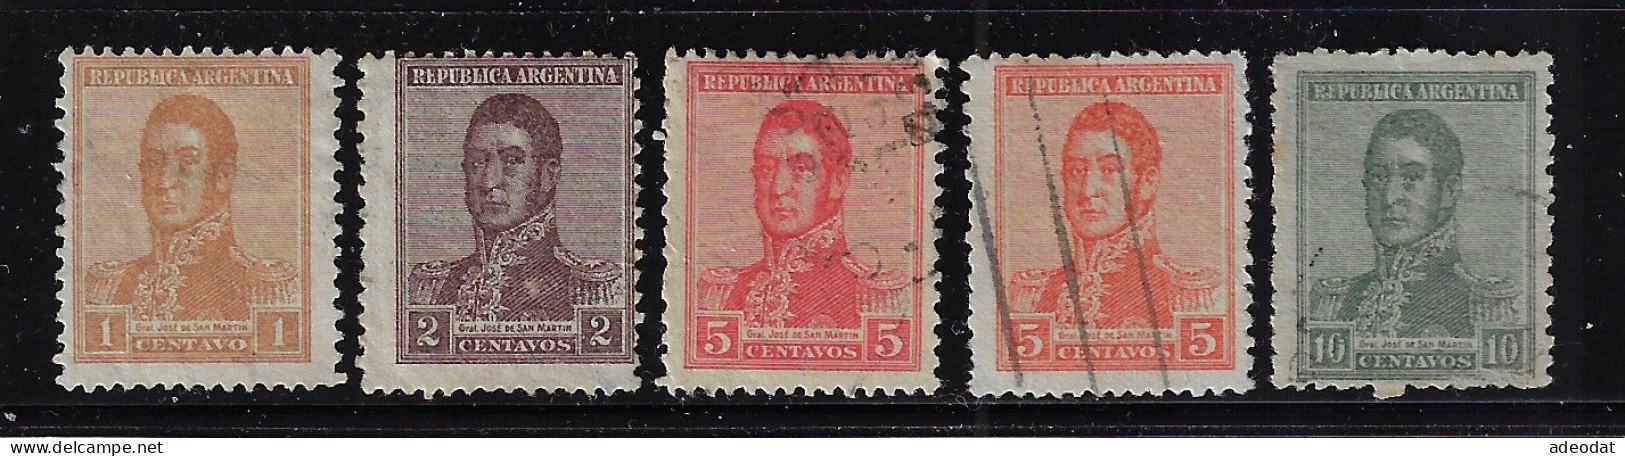 ARGENTINA  1917  SCOTT #232,233,236(2),237 USED - Used Stamps